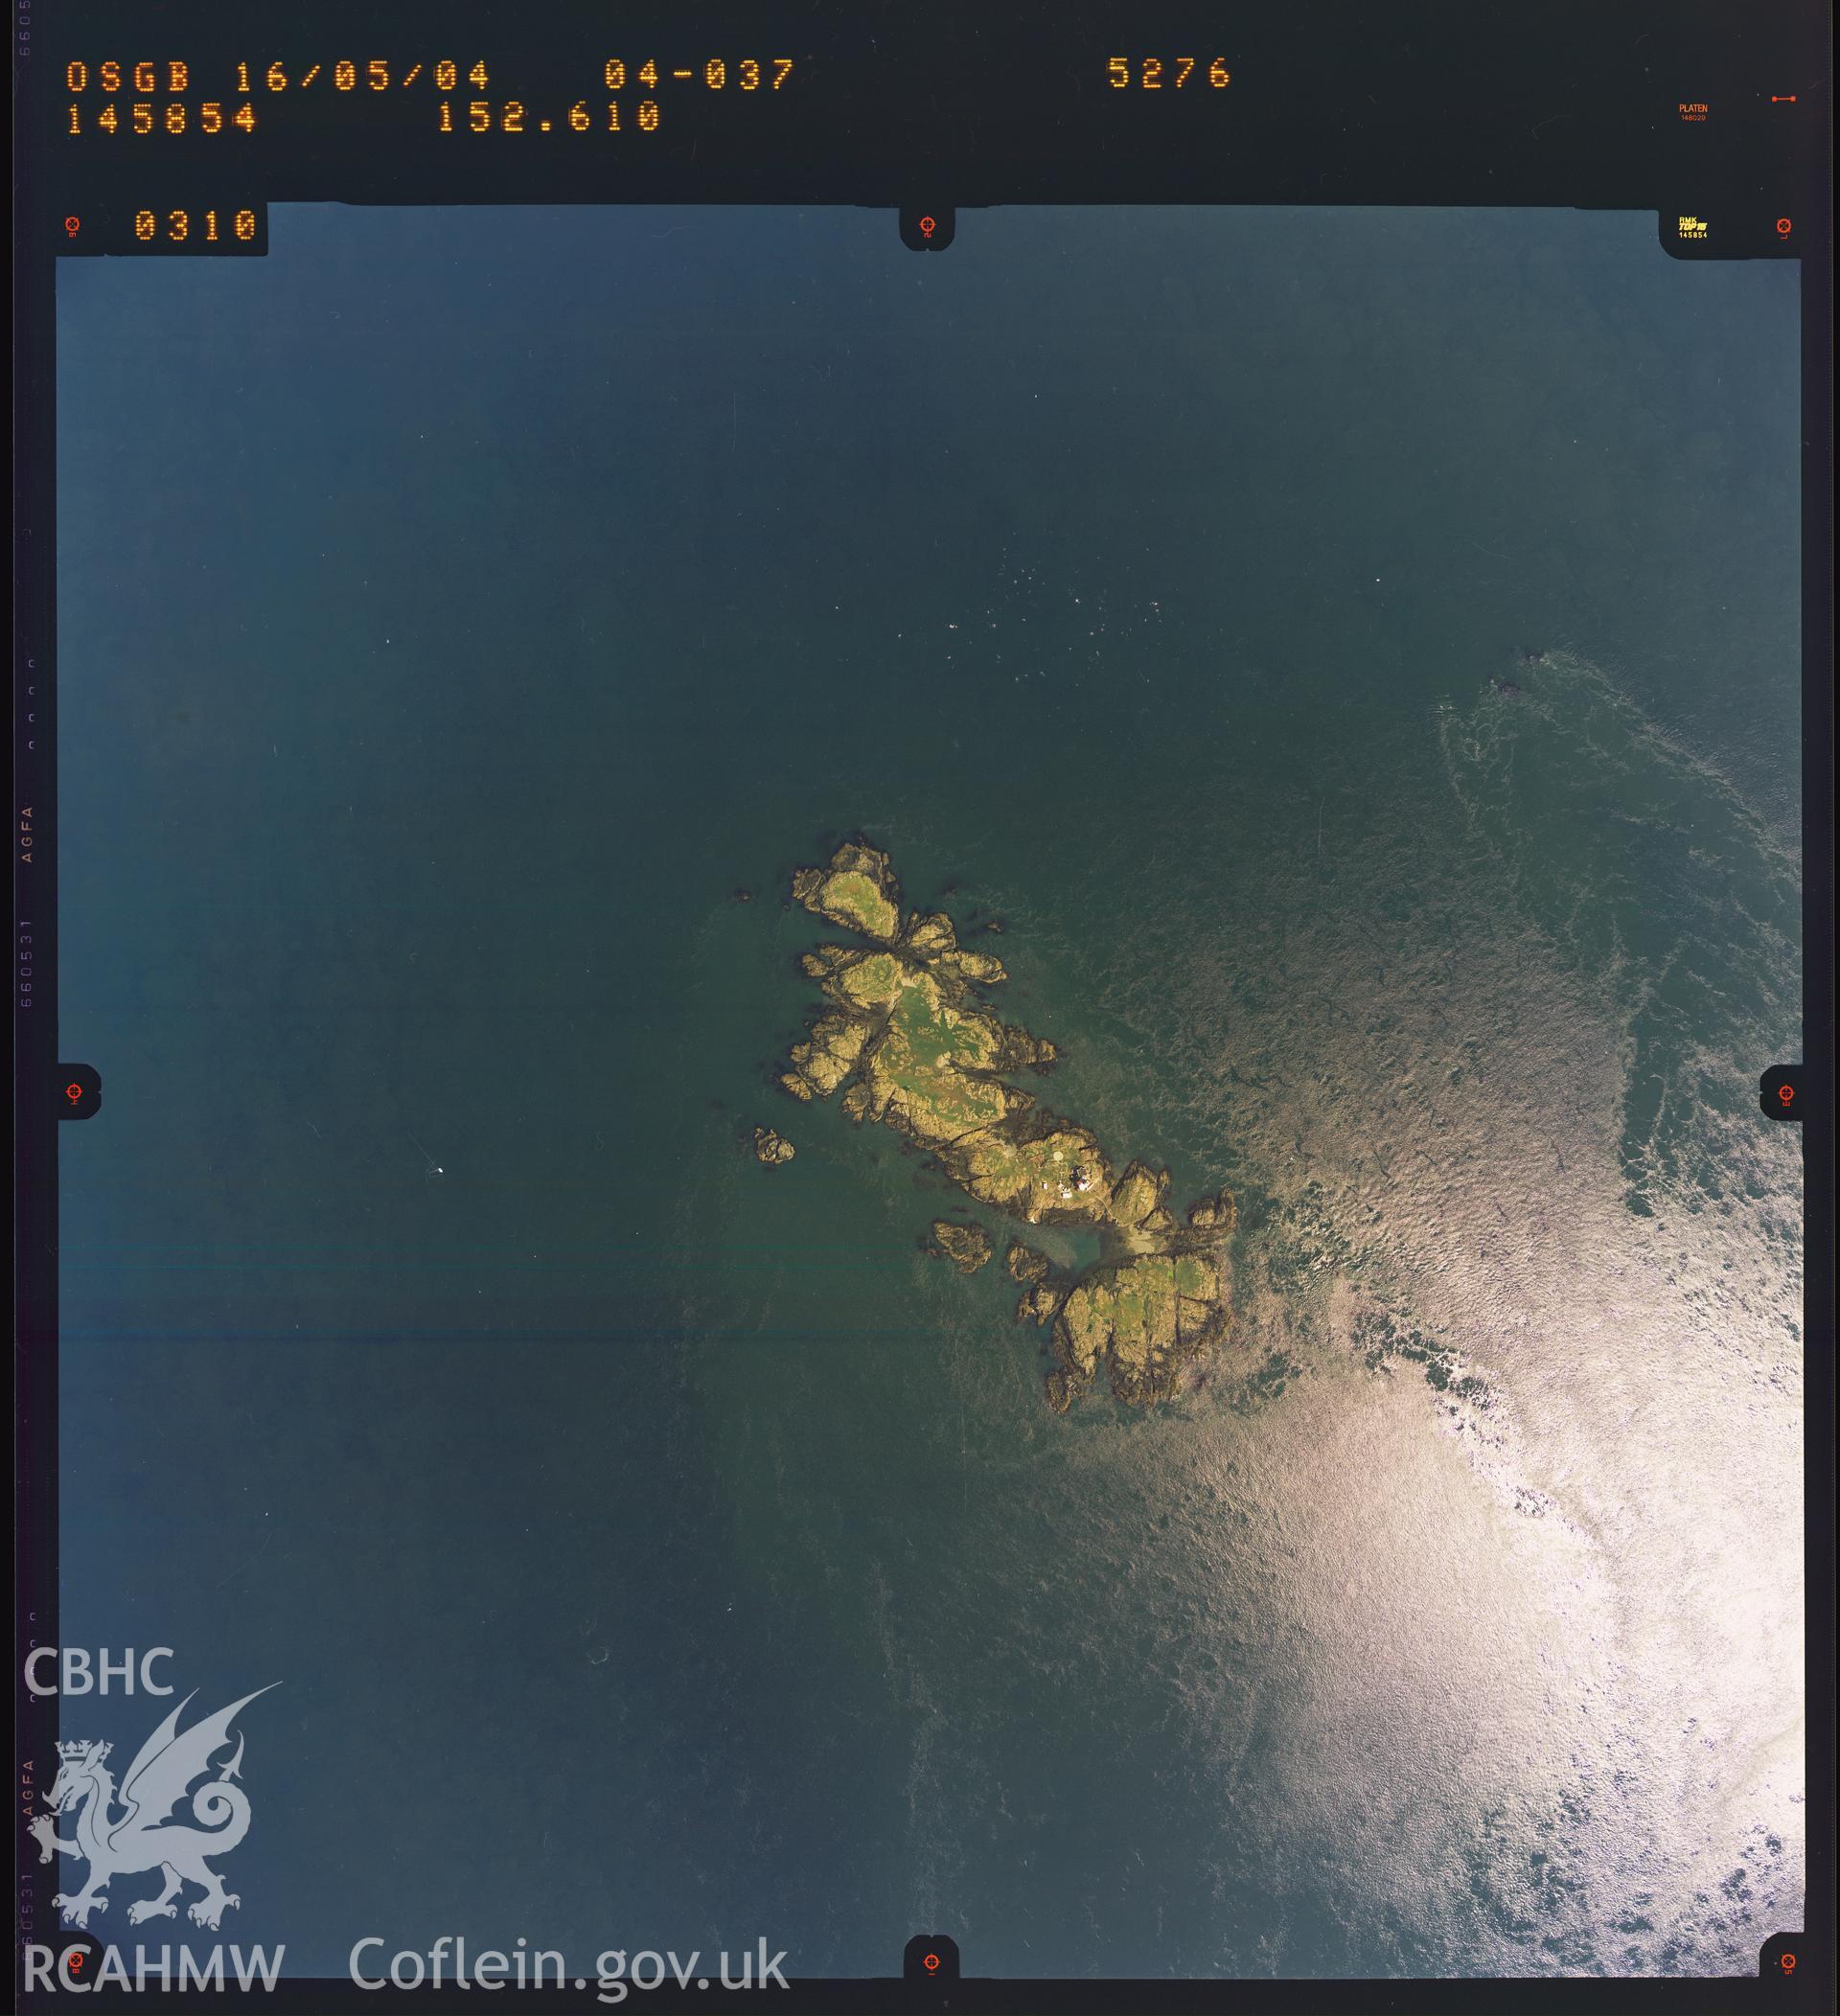 Digitized copy of a colour aerial photograph showing the Skerries, taken by Ordnance Survey, 2004.